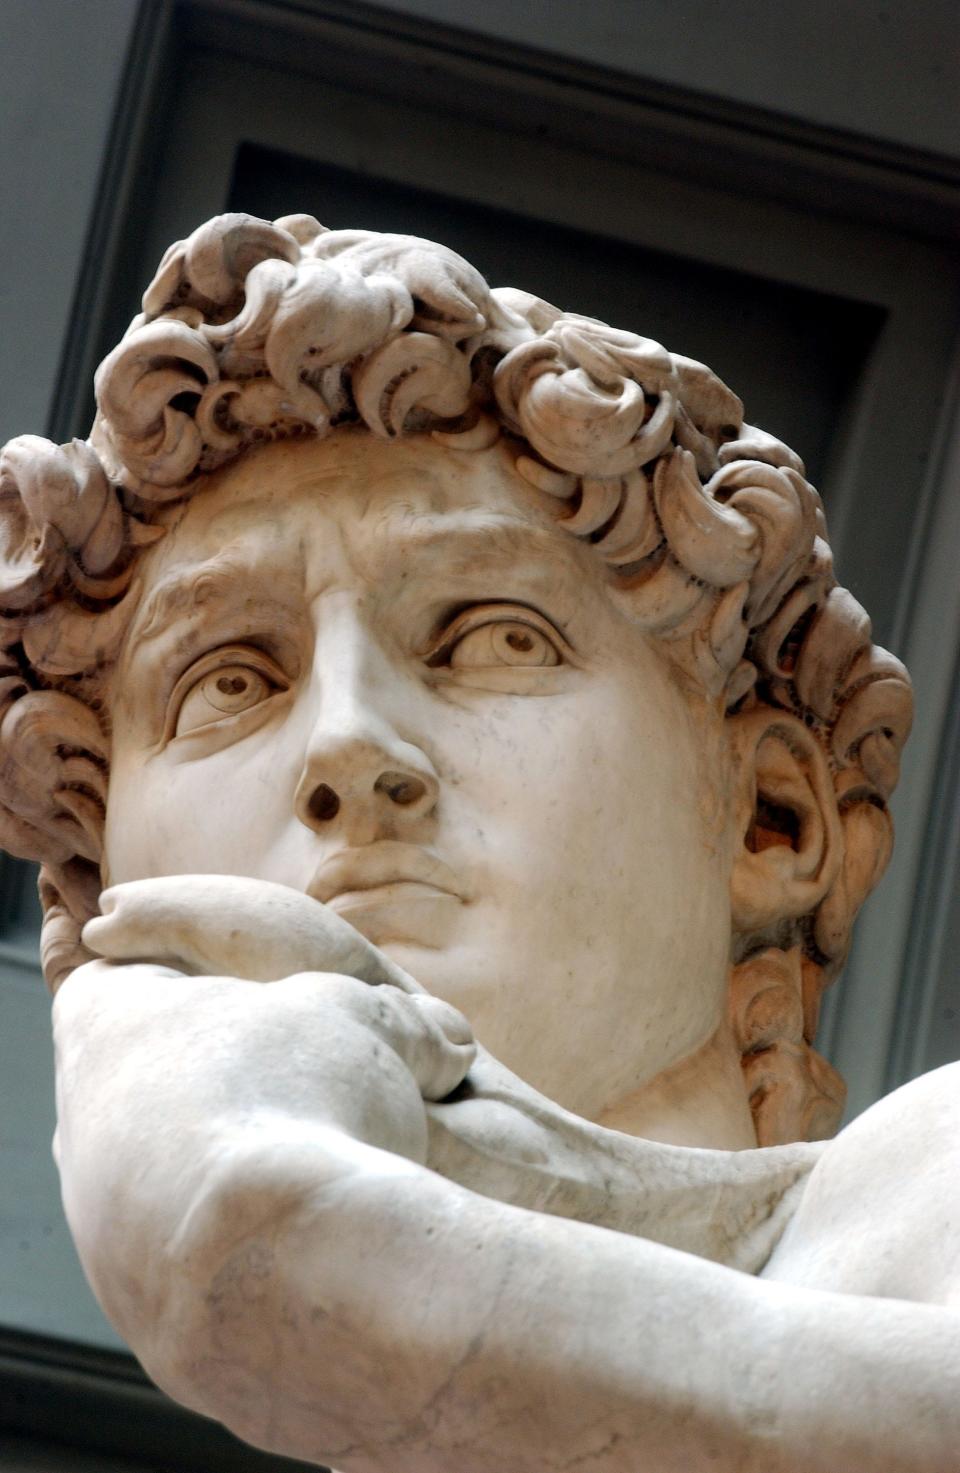 Restoration work on Michelangelo's masterpiece David is completed May 24, 2004 at the Galleria dell'Accademia in Florence, Italy. The work has taken a painstaking two years to complete with the statue going on show to the public May 25. (Photo by Franco Origlia/Getty Images)